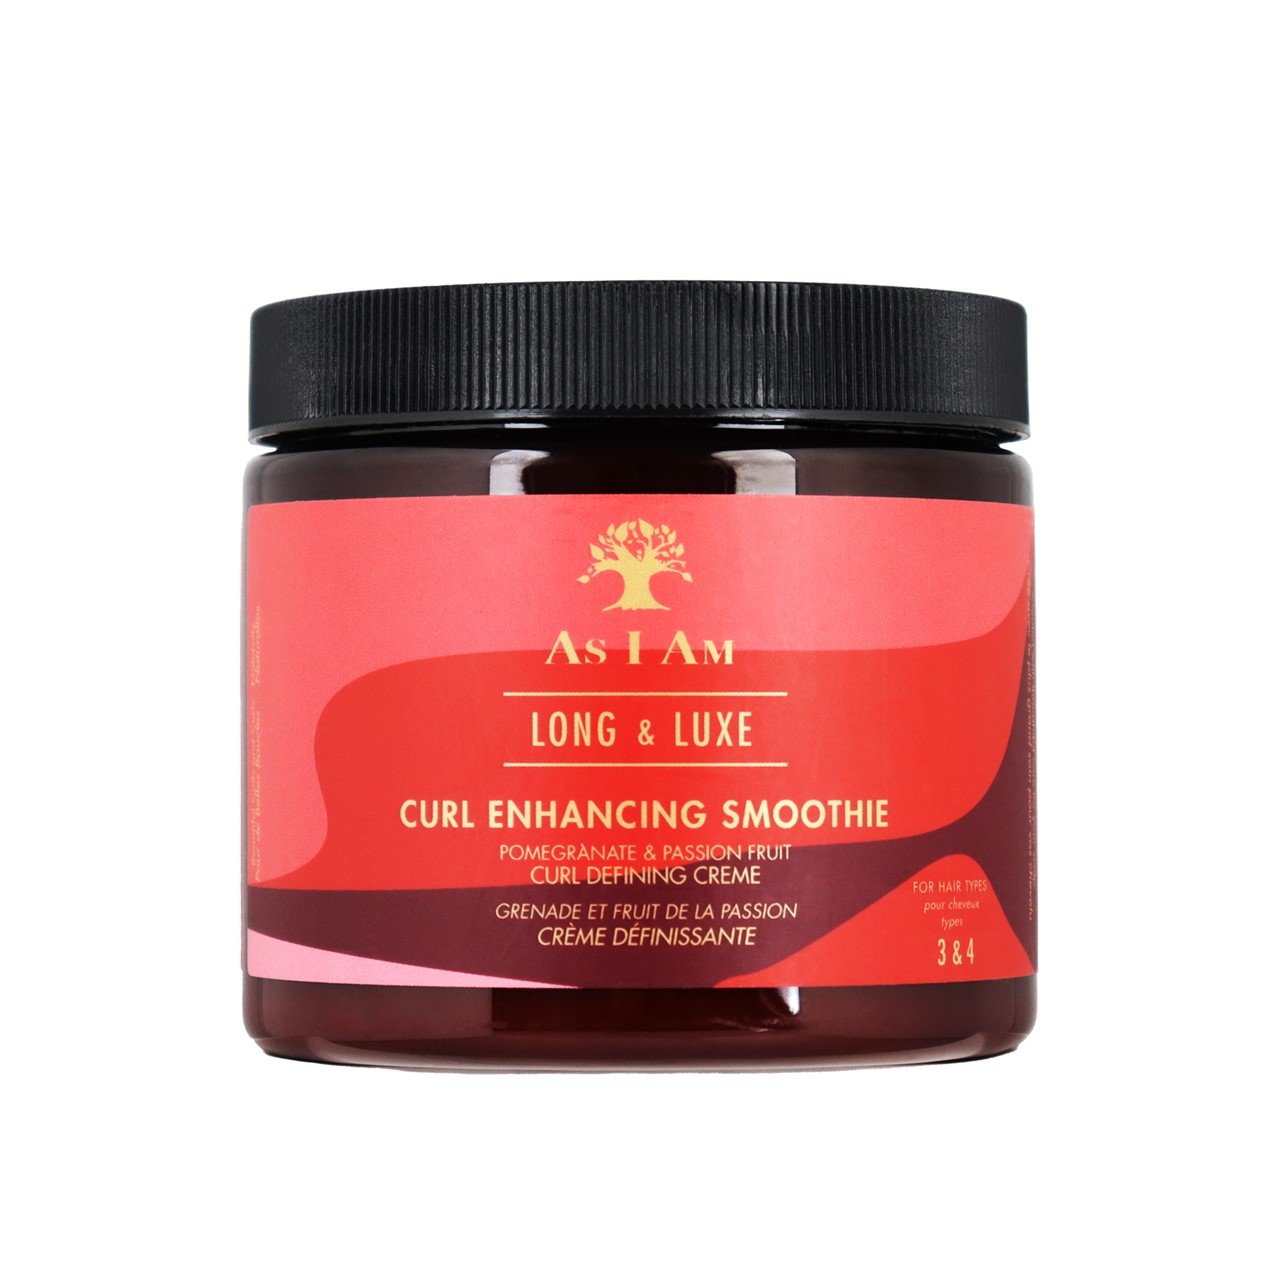 As I Am Long & Luxe Curl Enhancing Smoothie 454g (16oz)